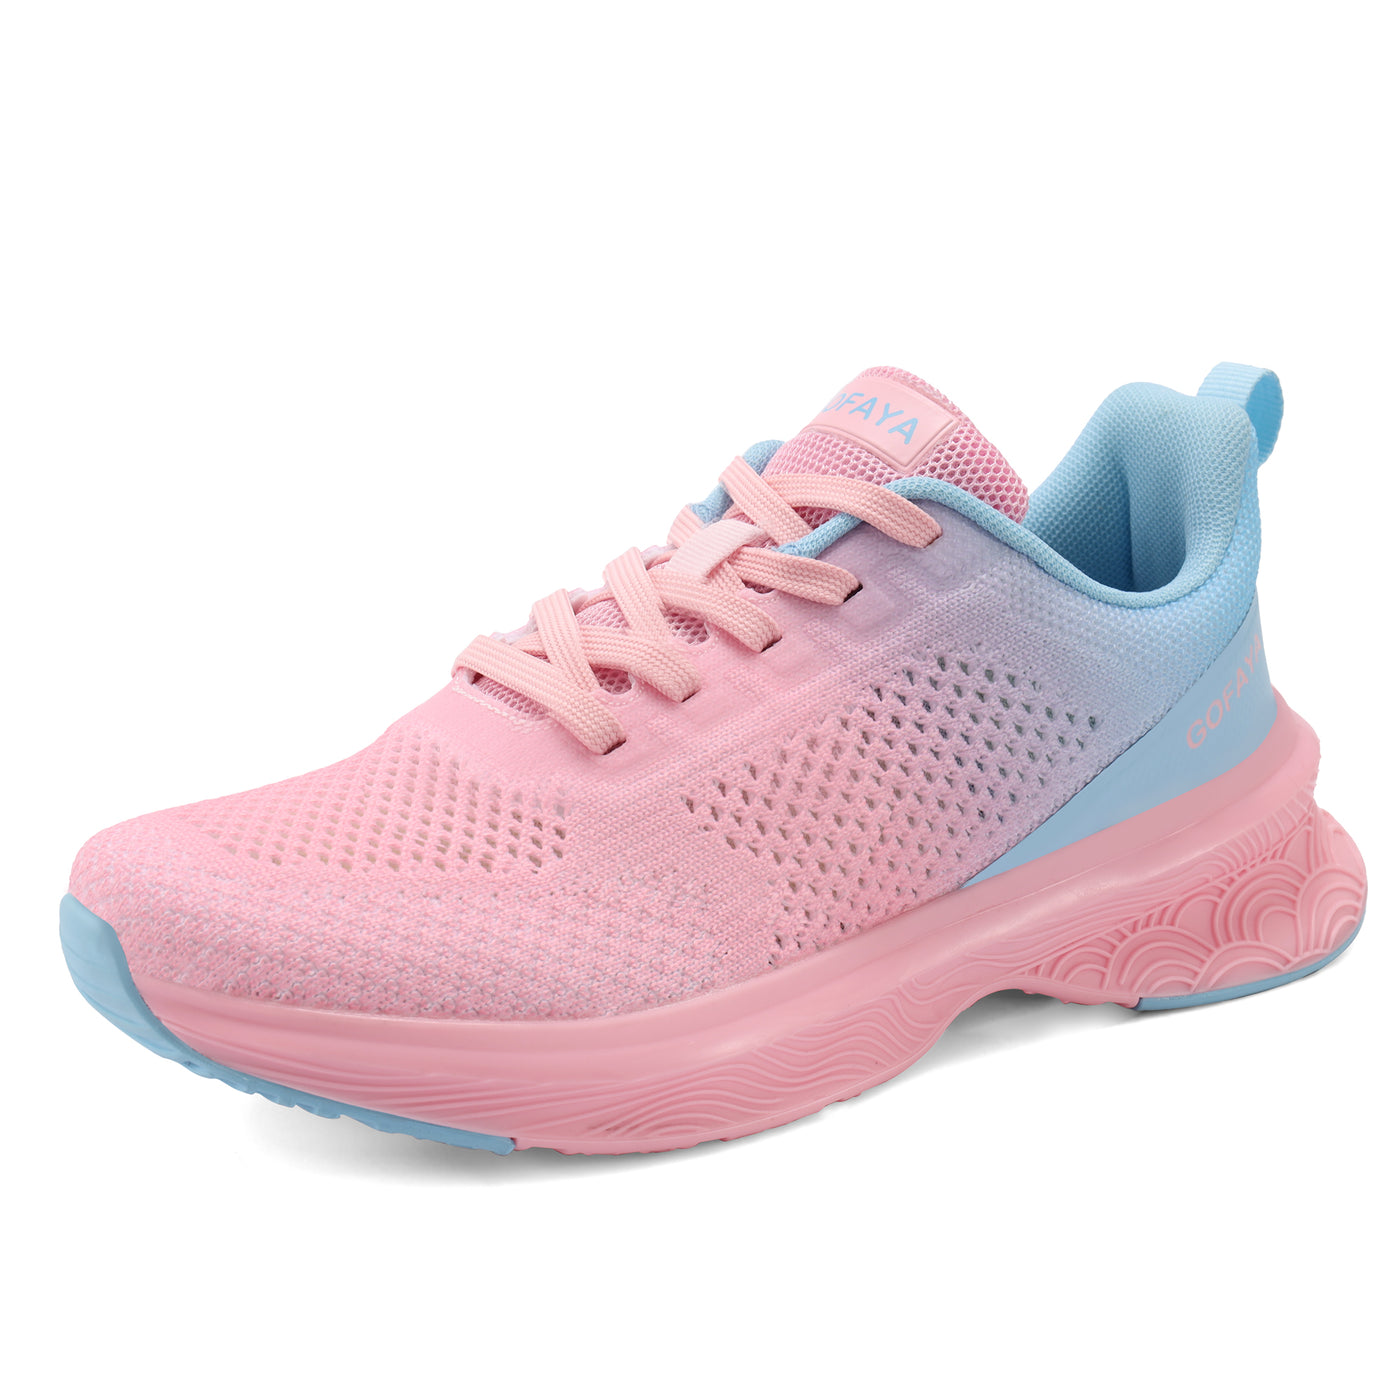 Just So So women's breathable sneakers